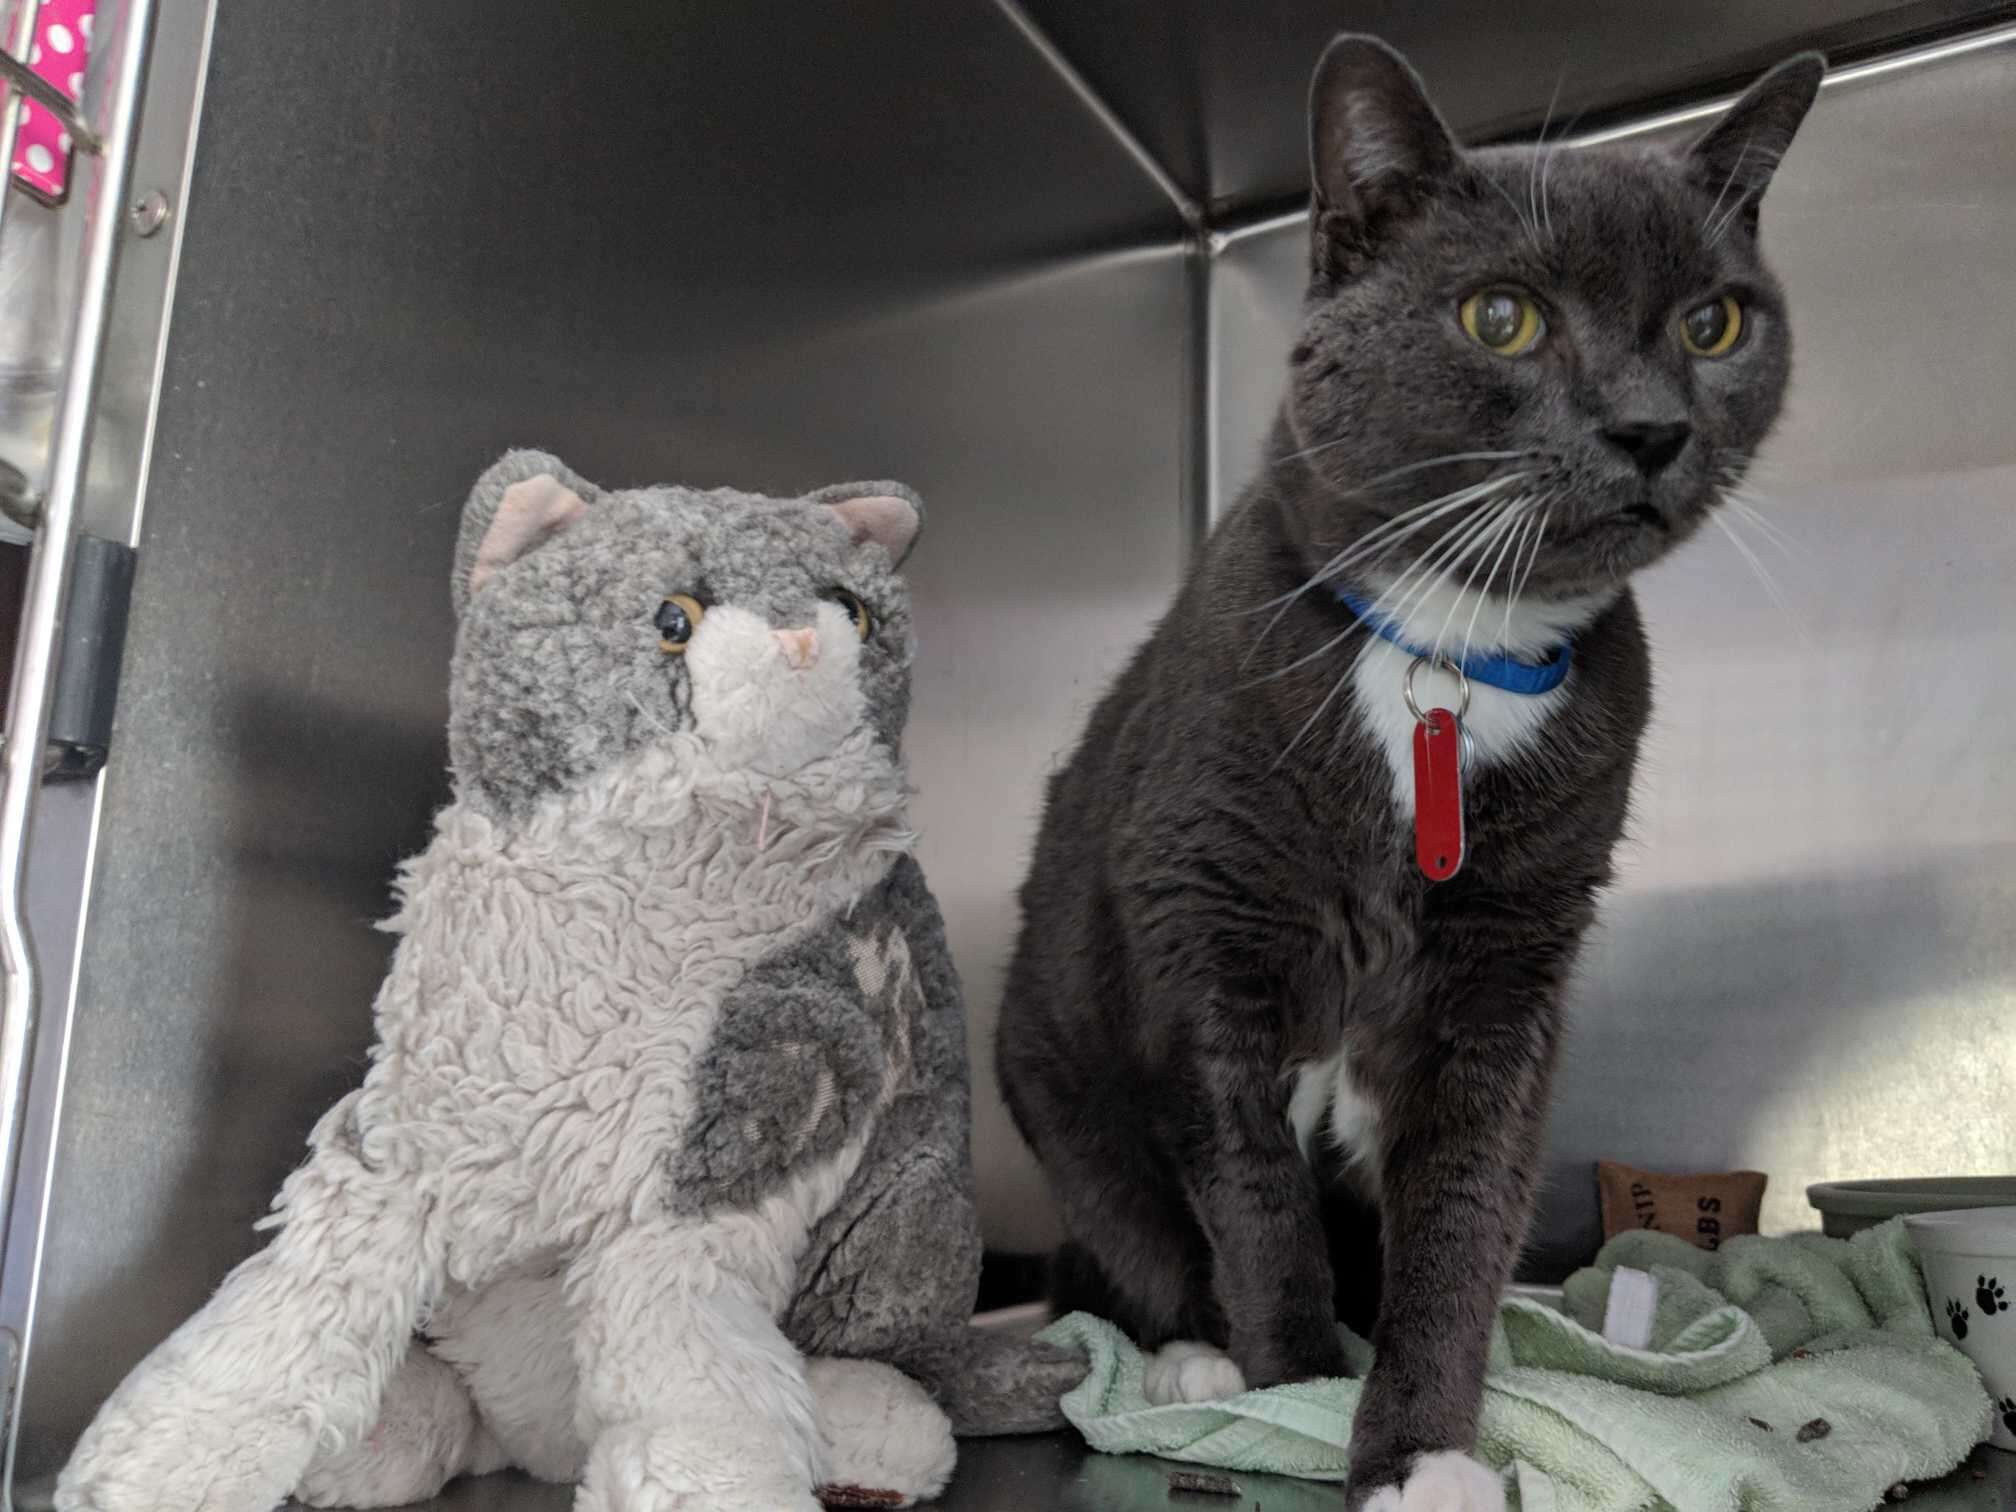 Cat at shelter with stuffed animal